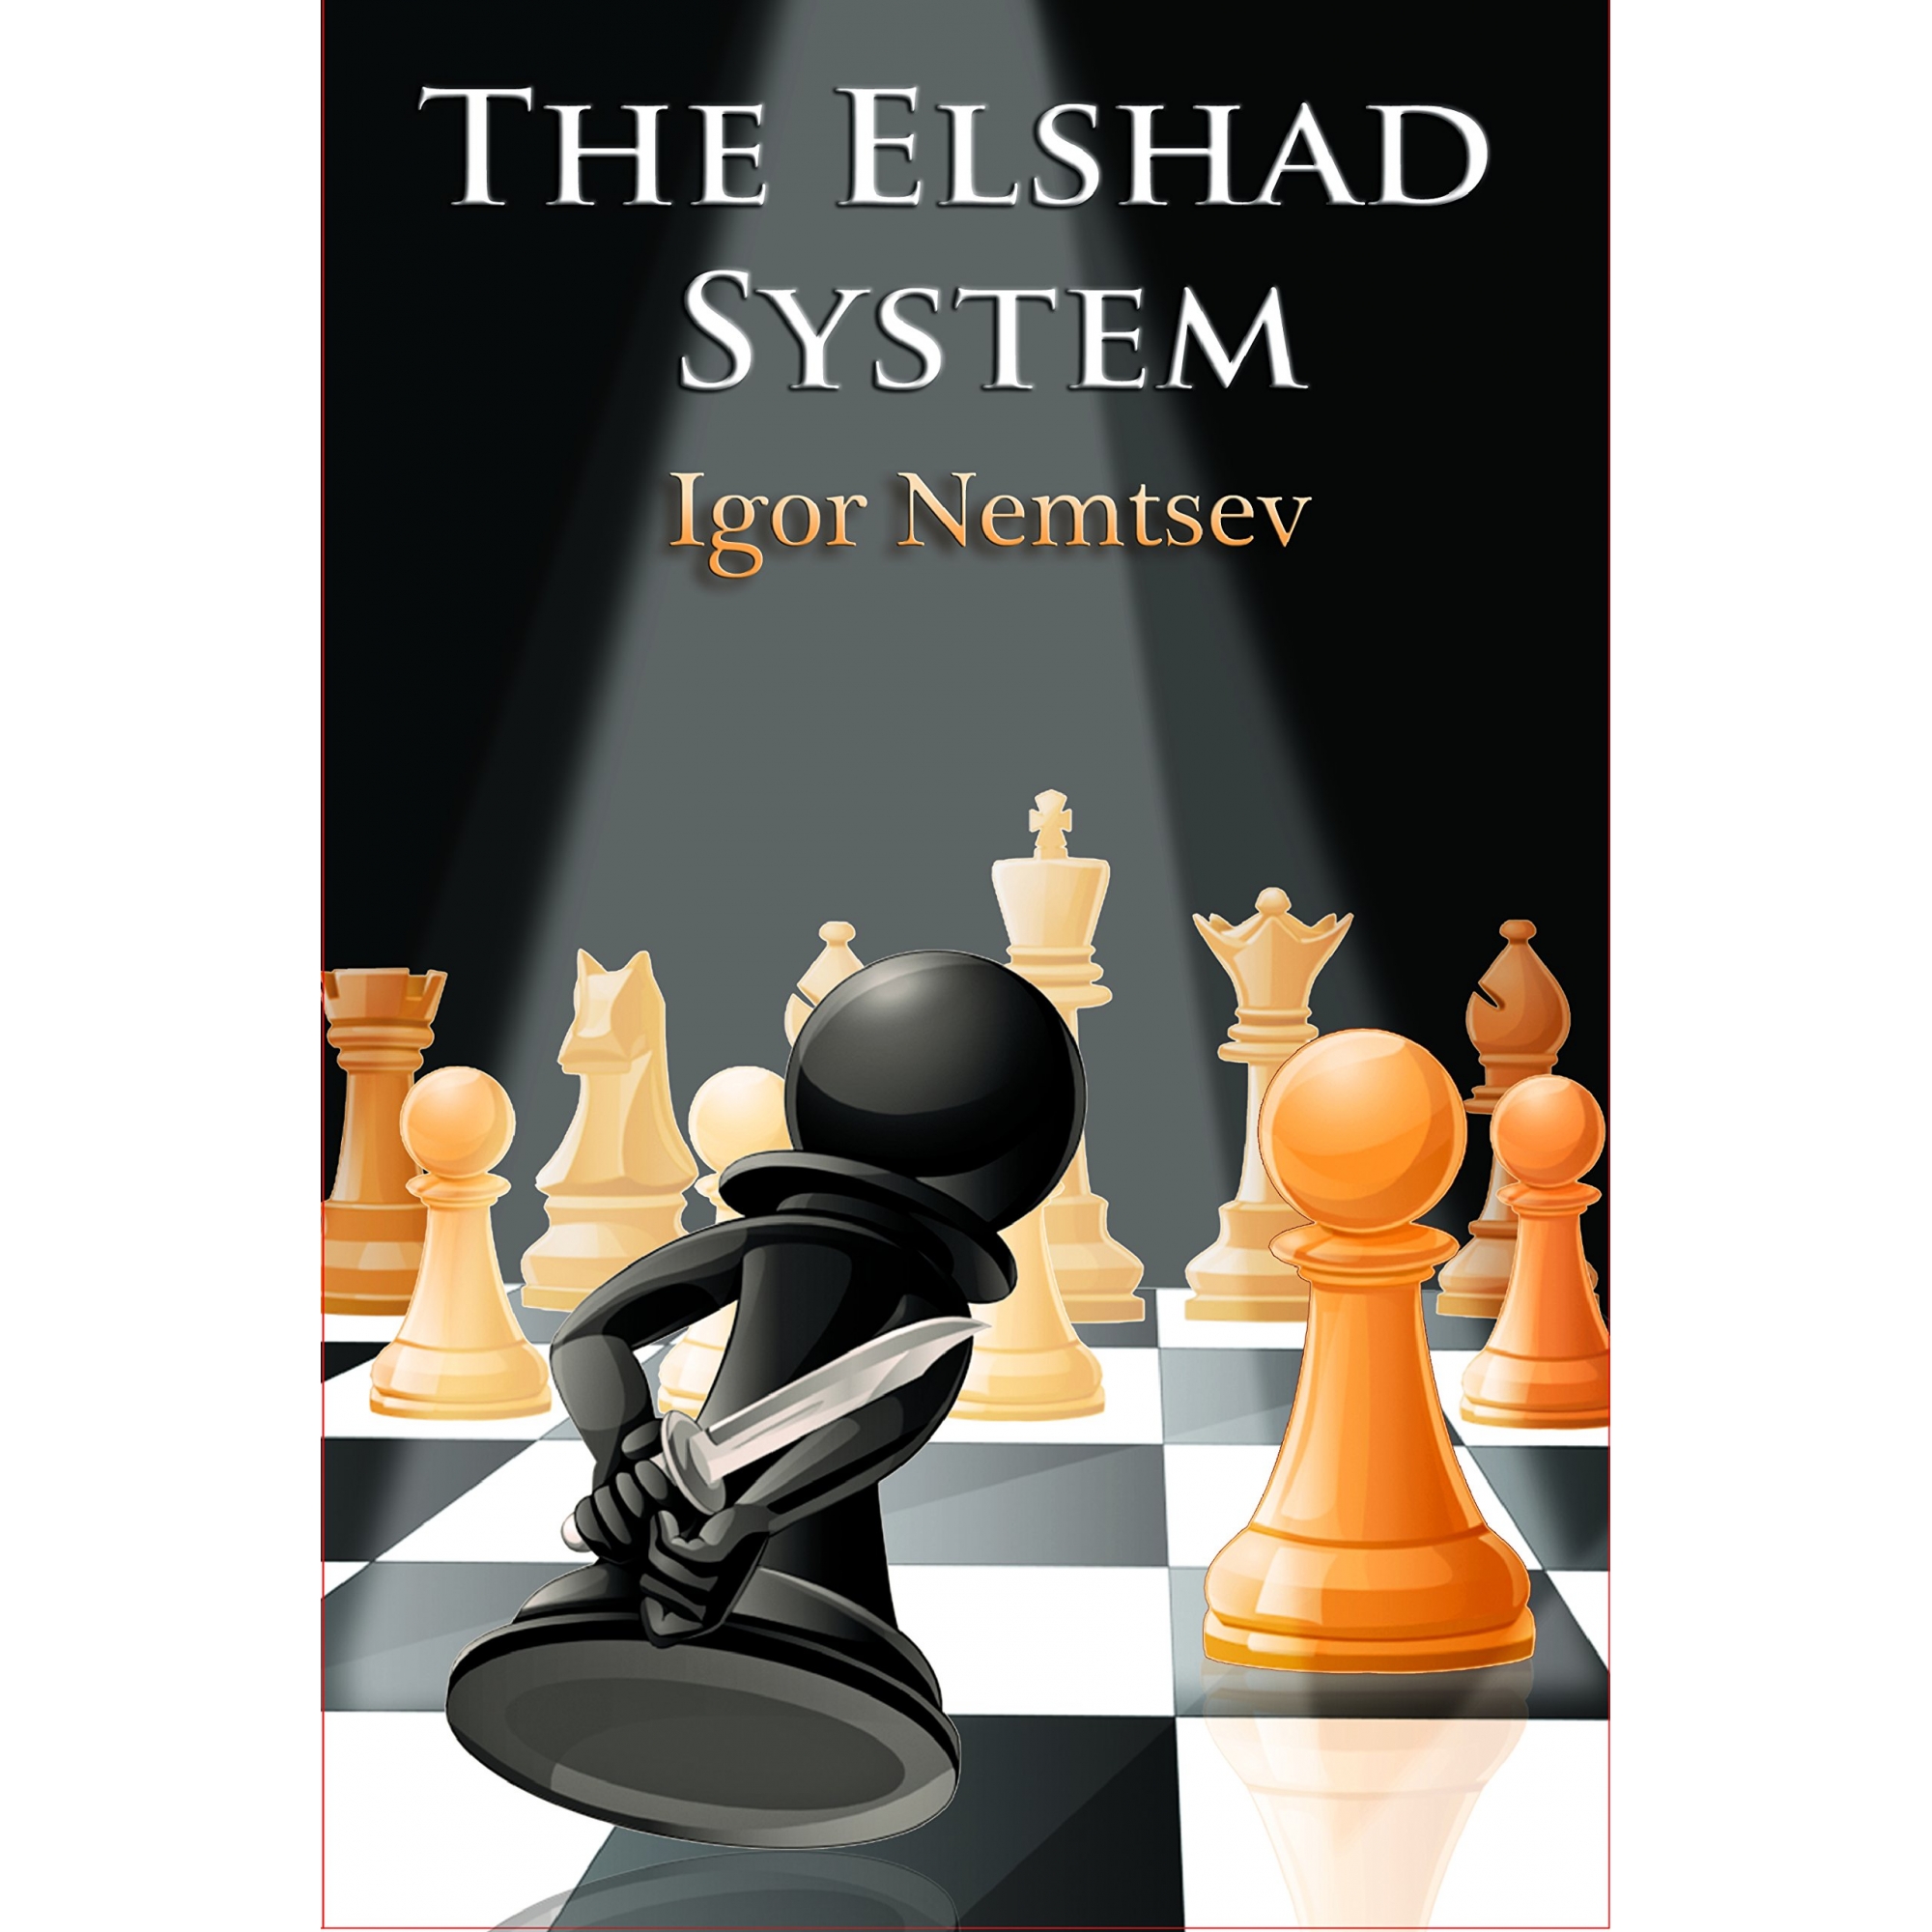 The Elshad System